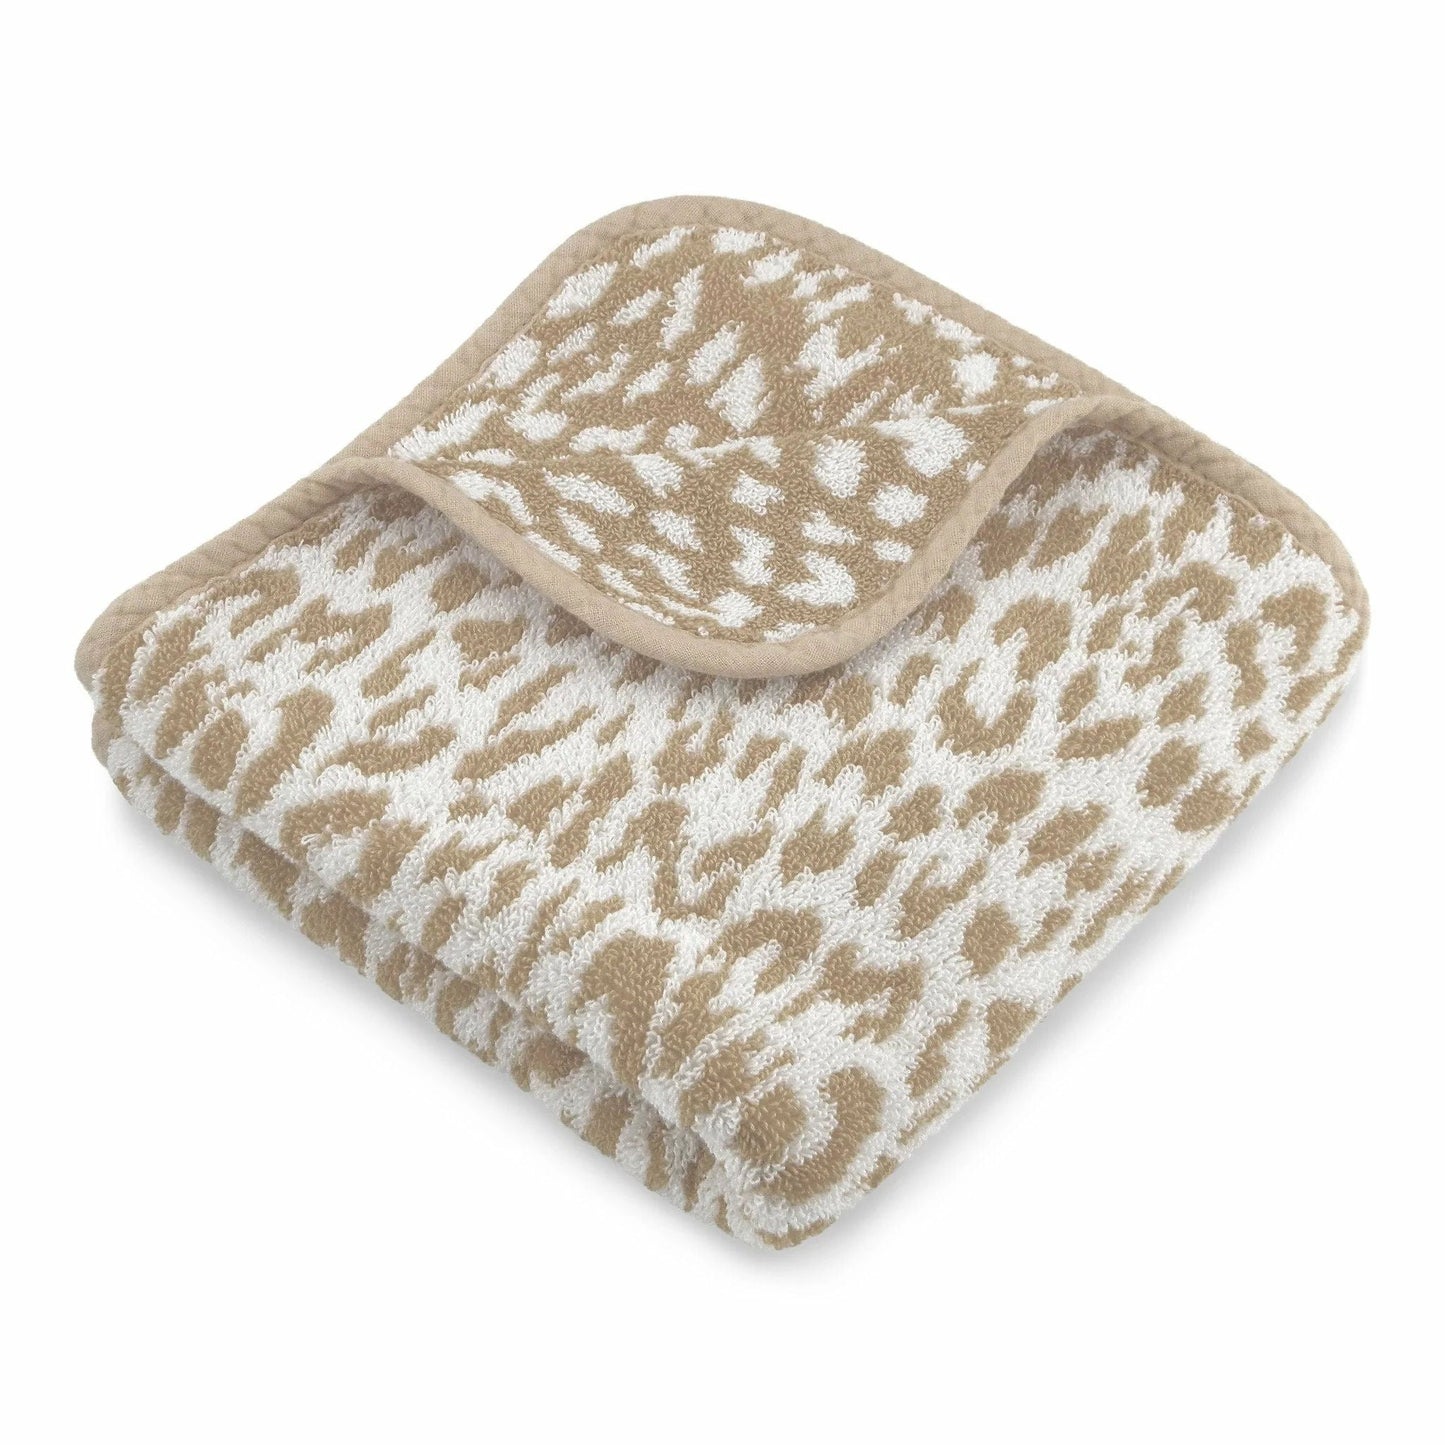 Beige Animal Print Zimba Towels by Abyss & Habidecor / Linen - |VESIMI Design| Luxury and Rustic bathrooms online